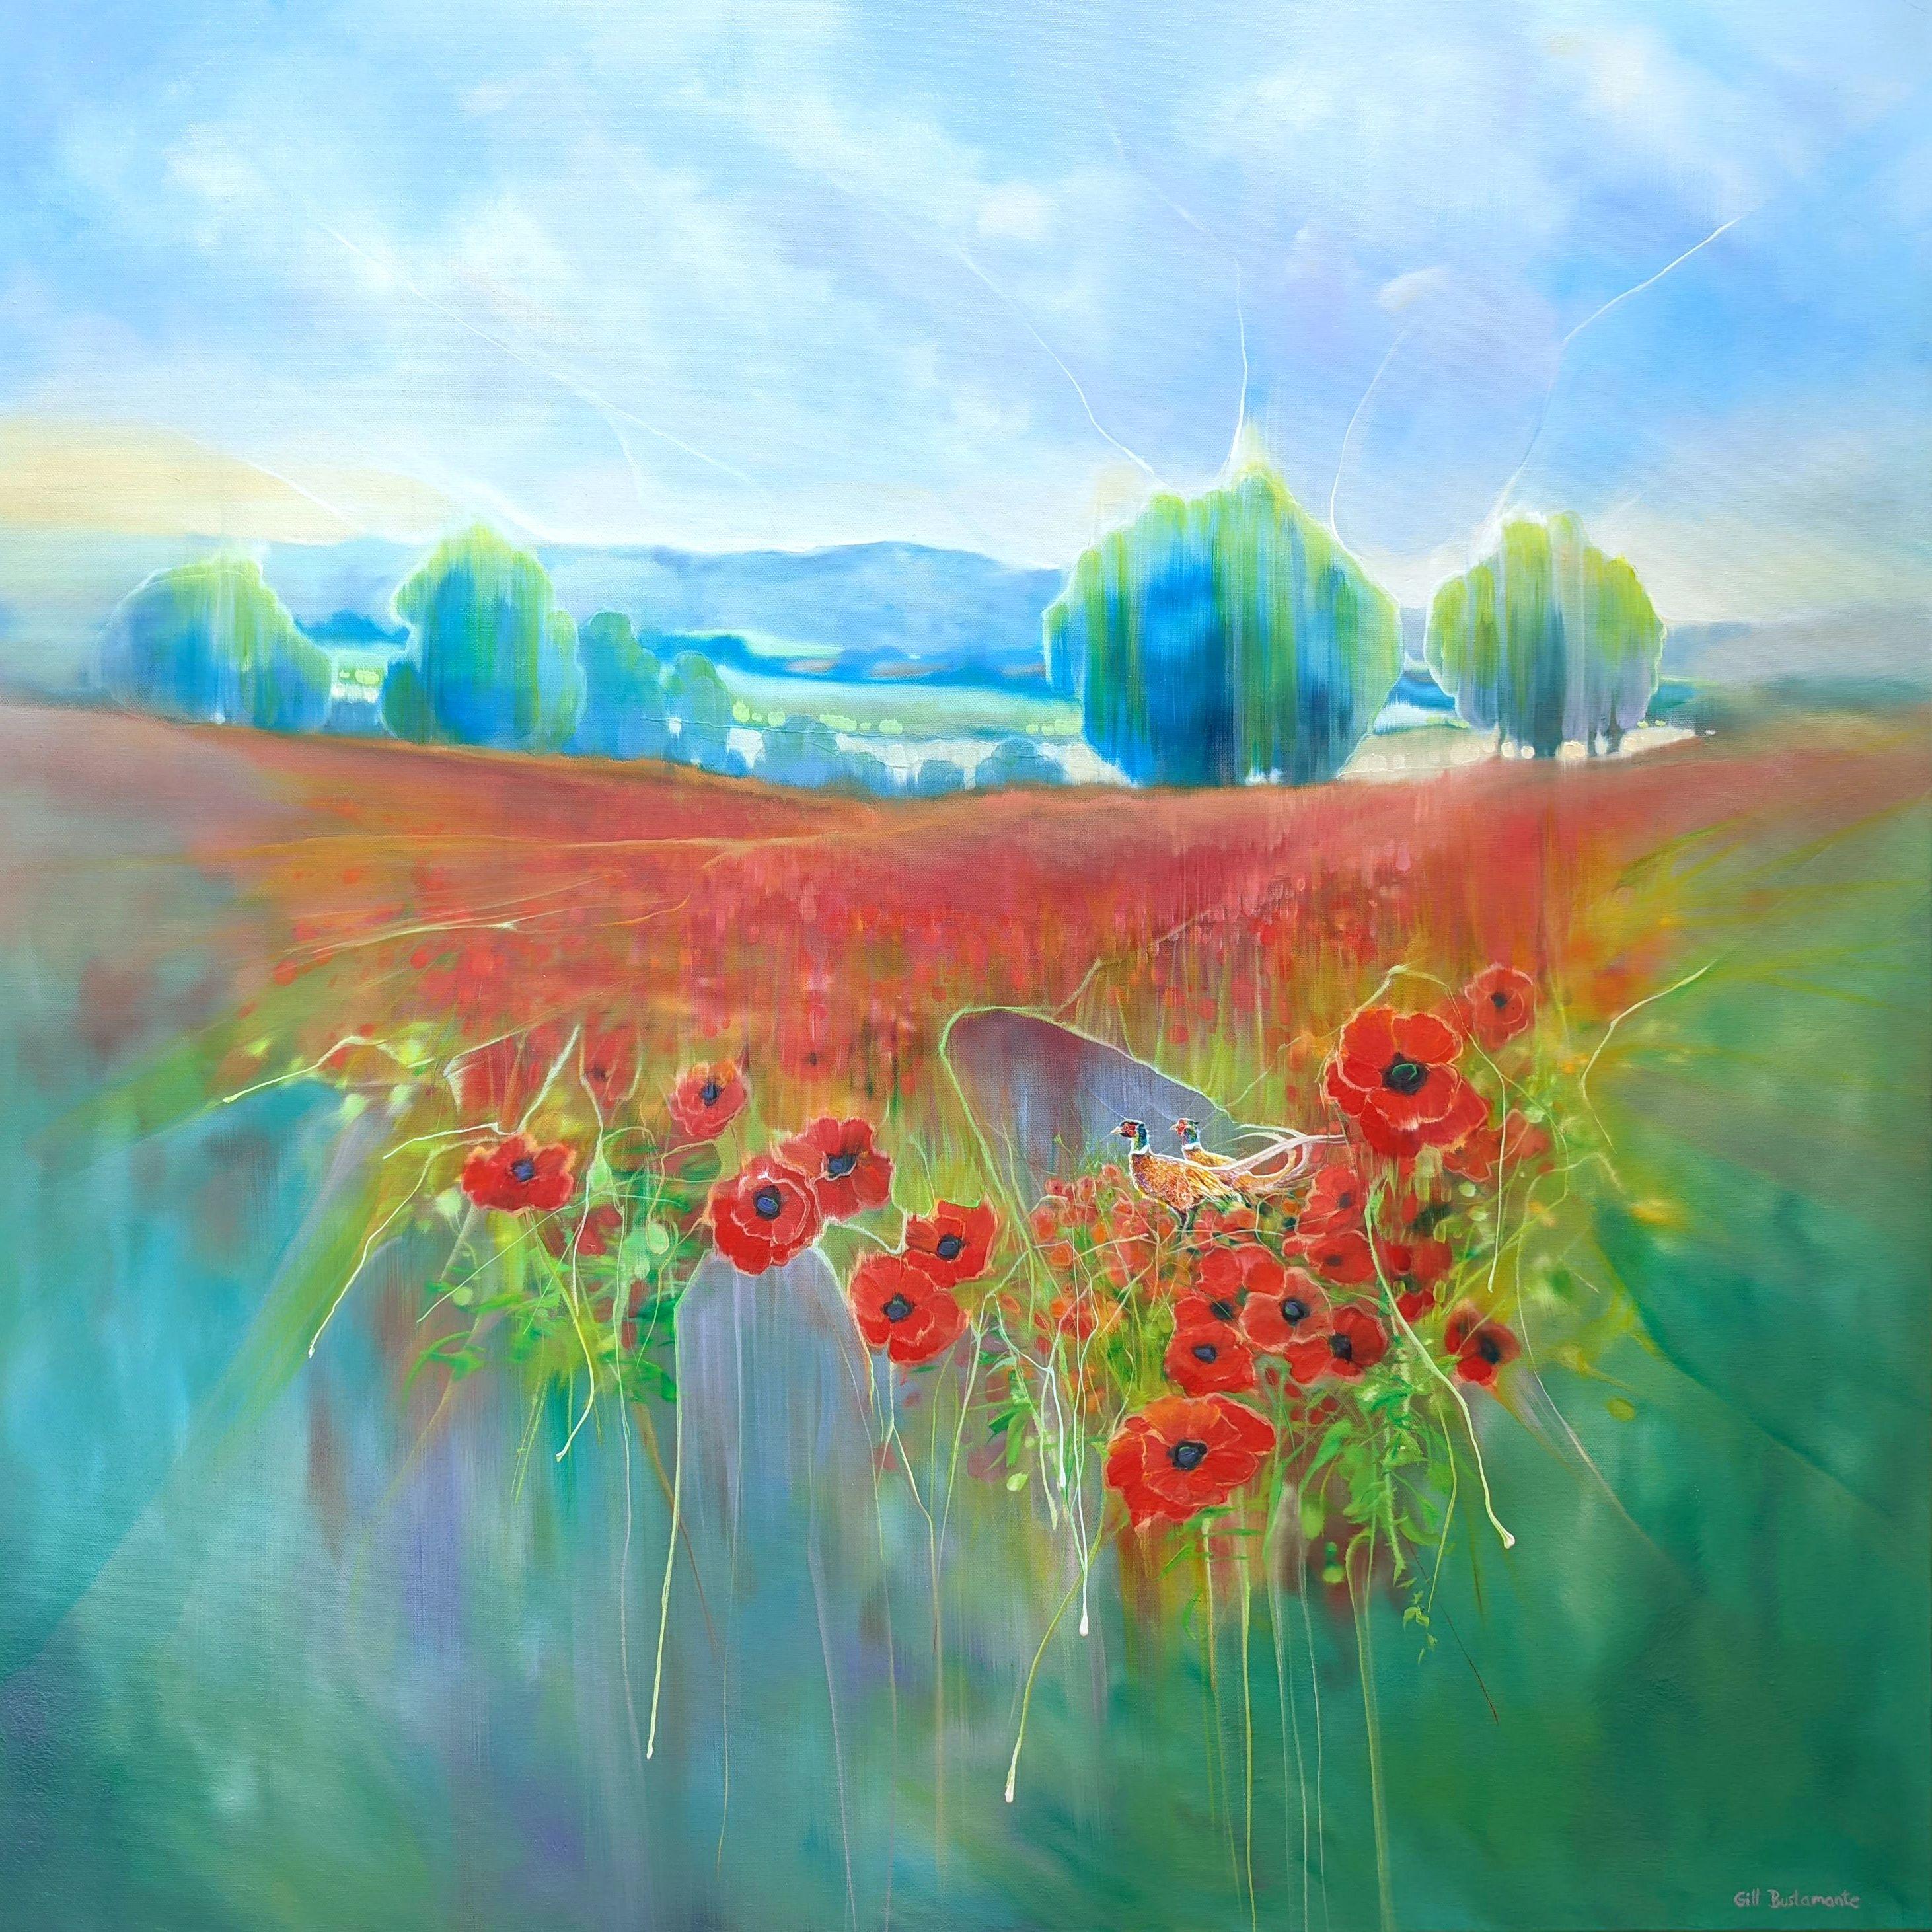 Beautiful England is an English countryside inspired landscape oil painting with pheasants and poppies in a summer meadow. It is 40x40x1.5 inches. The painting has a lot of energy to it although it is a peaceful scene and it catapults the viewer